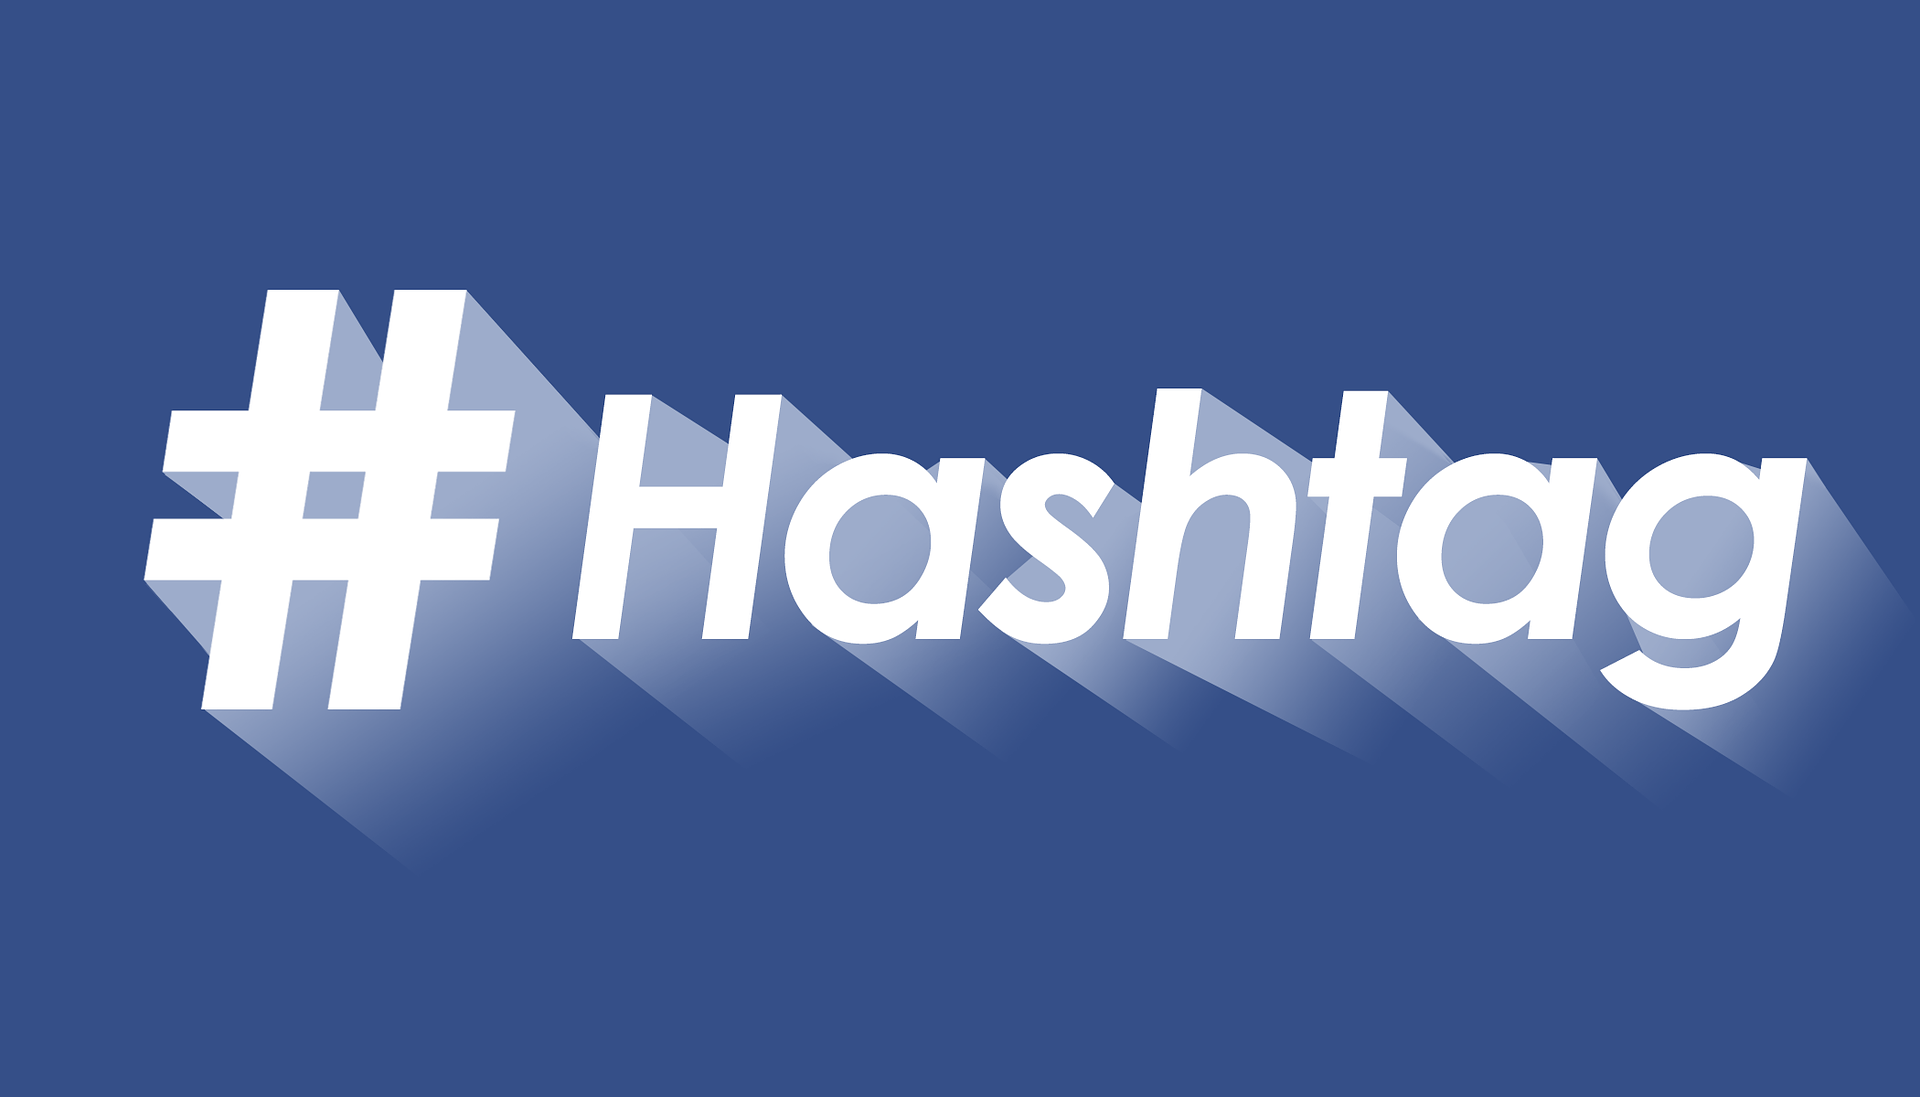 Importance of hashtags in social media